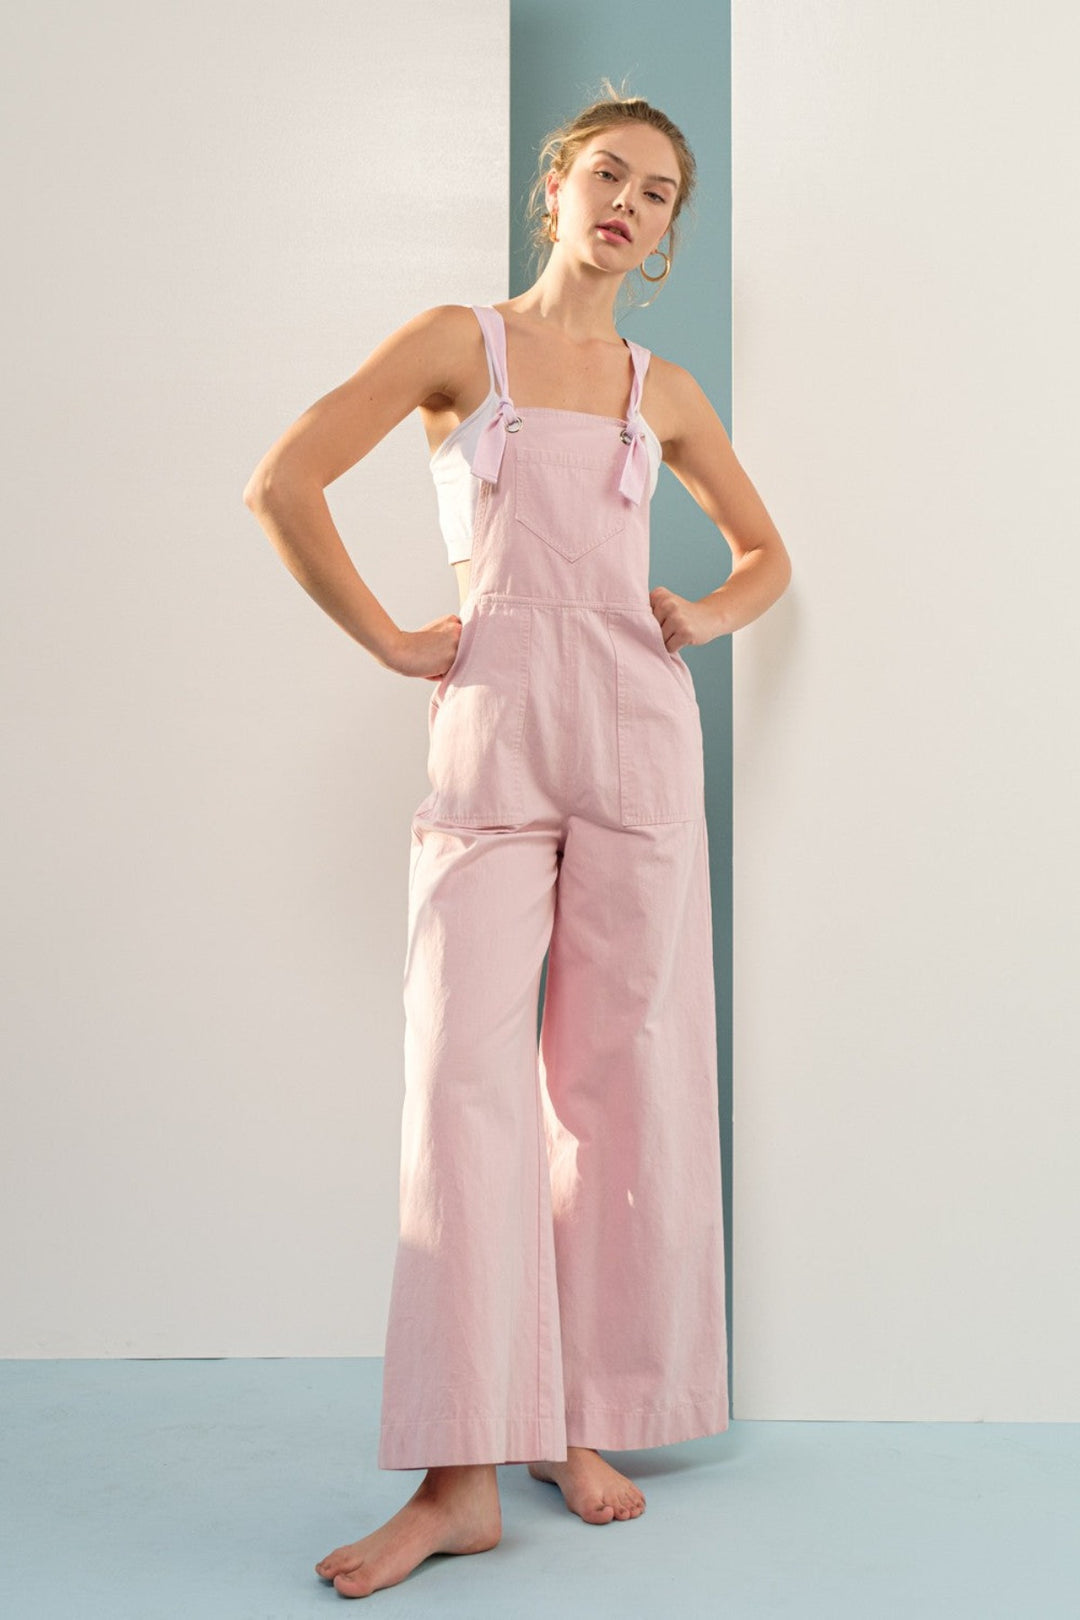 This on-trend jumpsuit is crafted from 100% cotton for unbeatable comfort. Its wide leg silhouette and tie straps add modern sophistication, while front and back pockets provide convenient storage. Complete your look with this timeless, versatile piece.